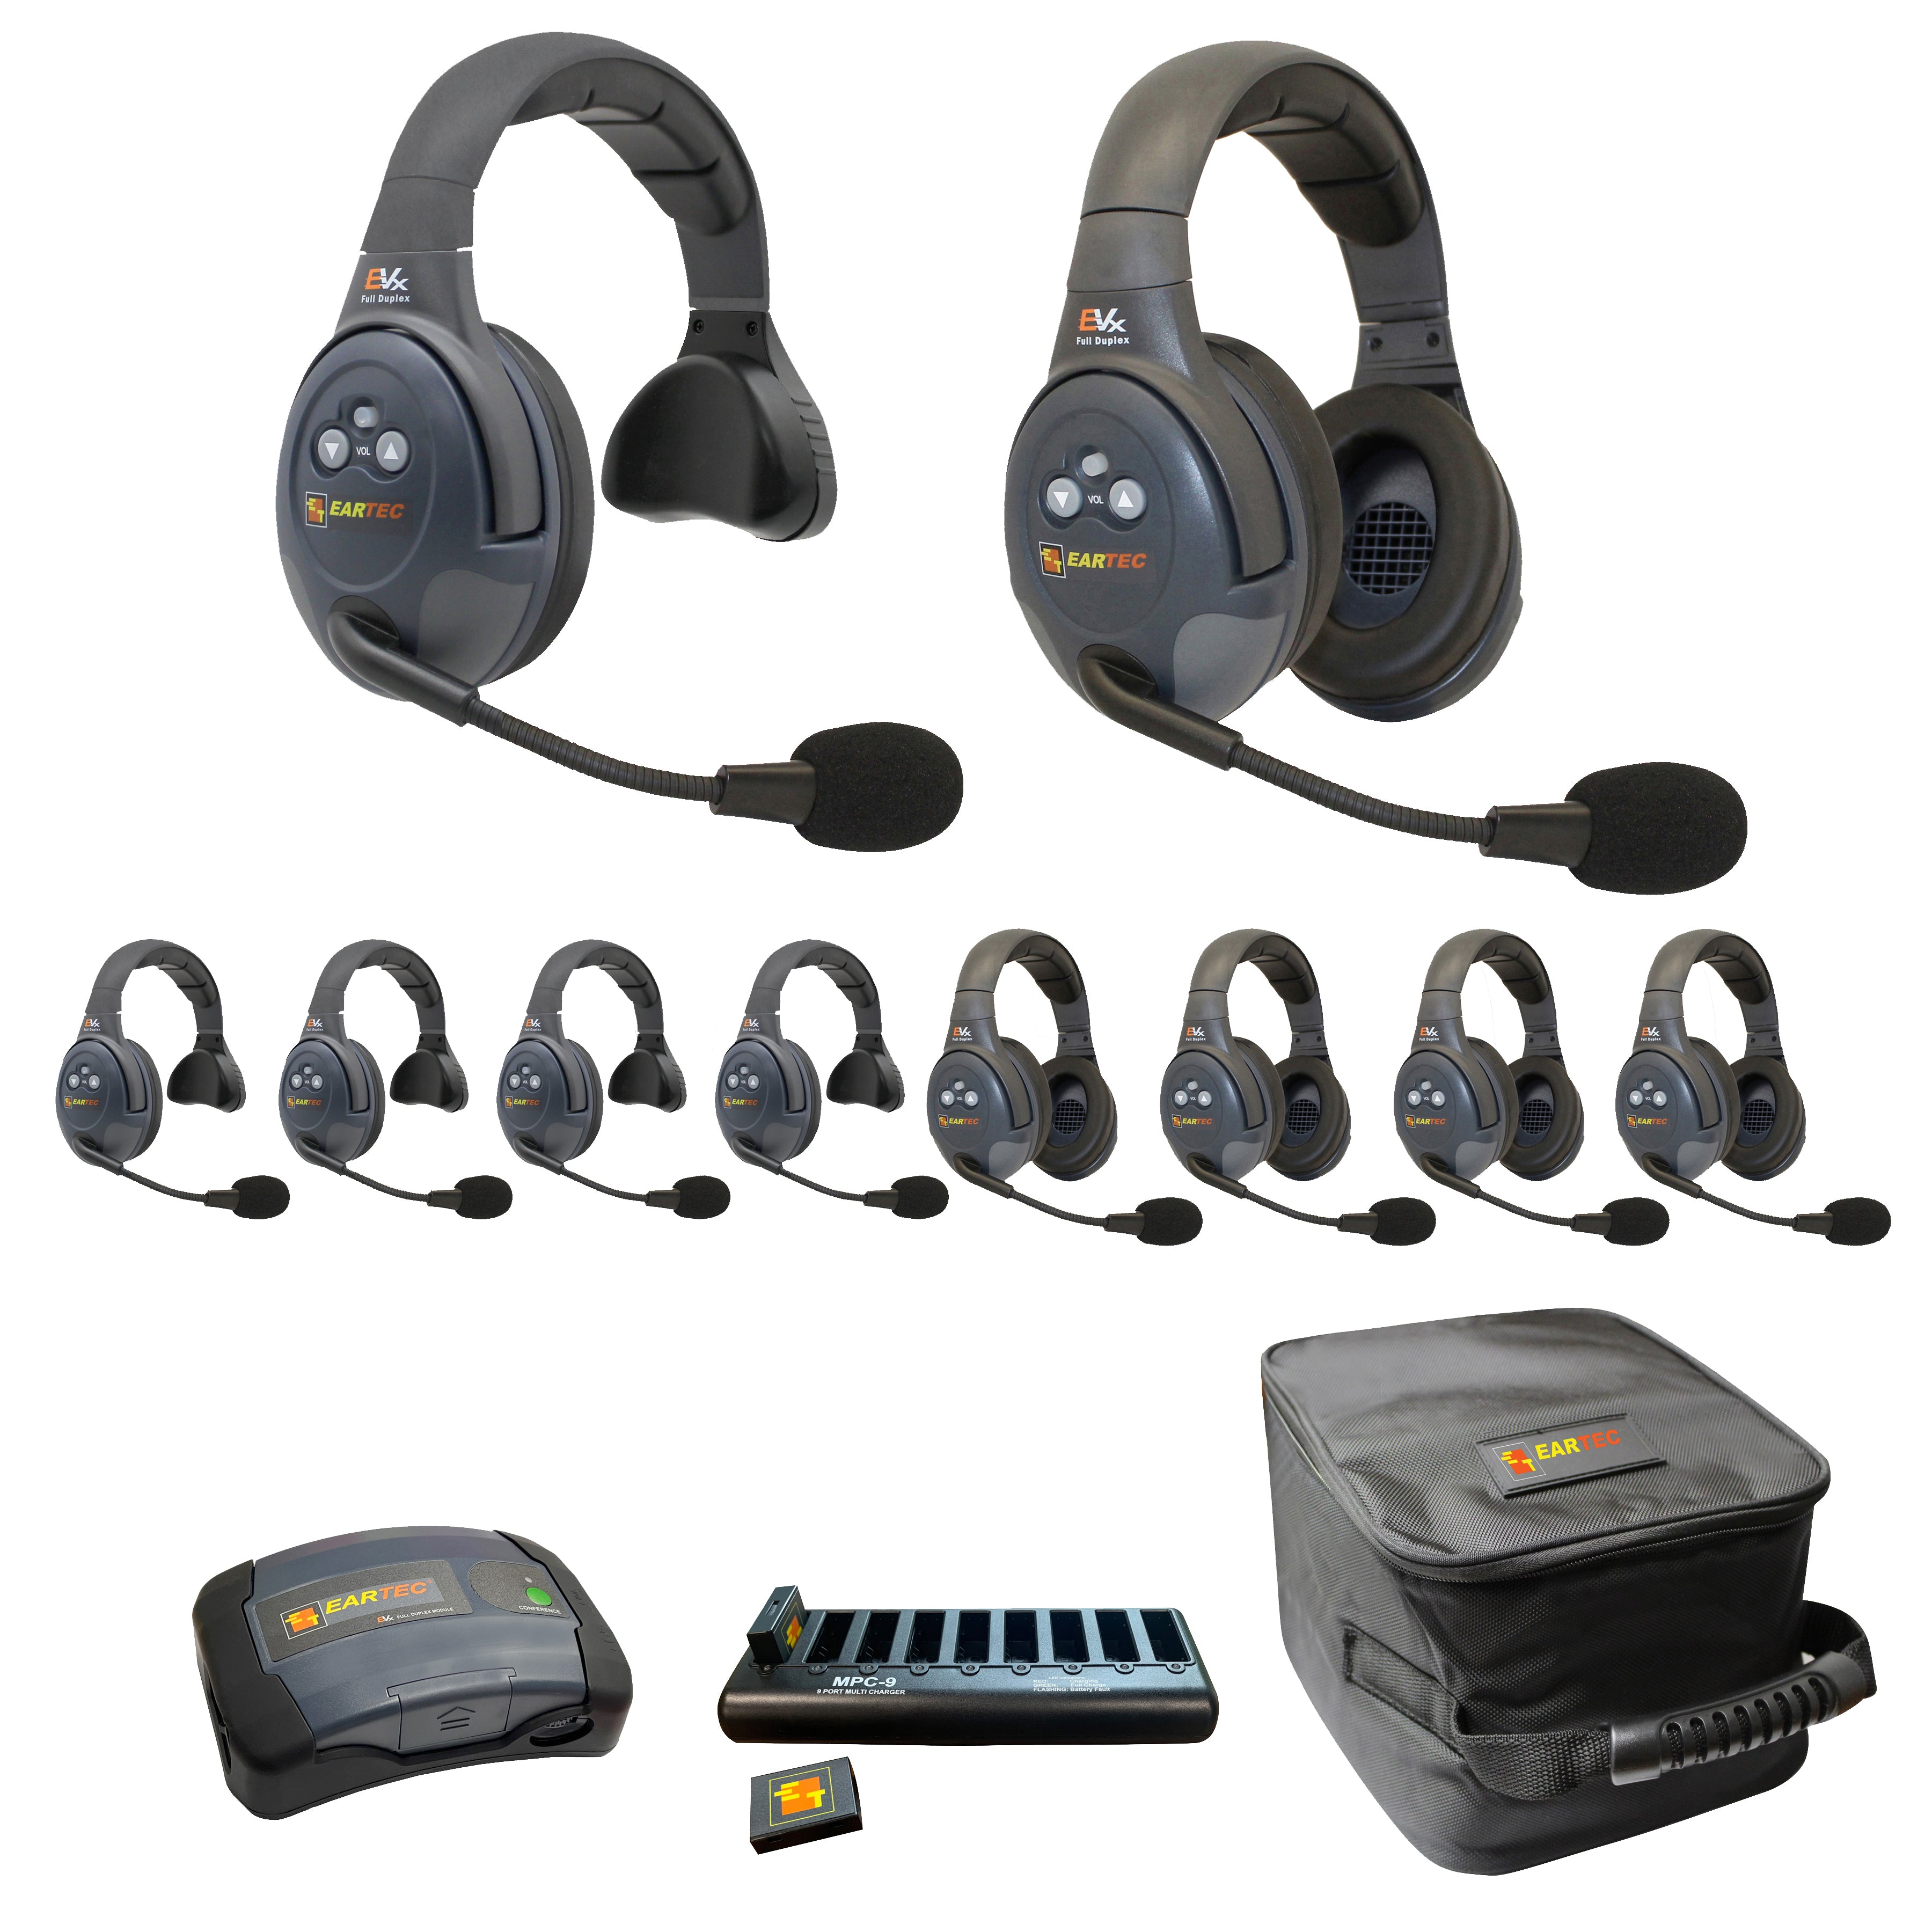 Eartec 1- EVADE C-MOD 2- EVADE Single-Ear Main Headset 4- EVADE Single-Ear Remote Headset 4- EVADE Double-Ear Remote Headsets 2- 9-Port Charger w/ Adapter 2- Extra large Soft Padded Case 10 X Lithium-Polymer Batteries EVX1055-CM